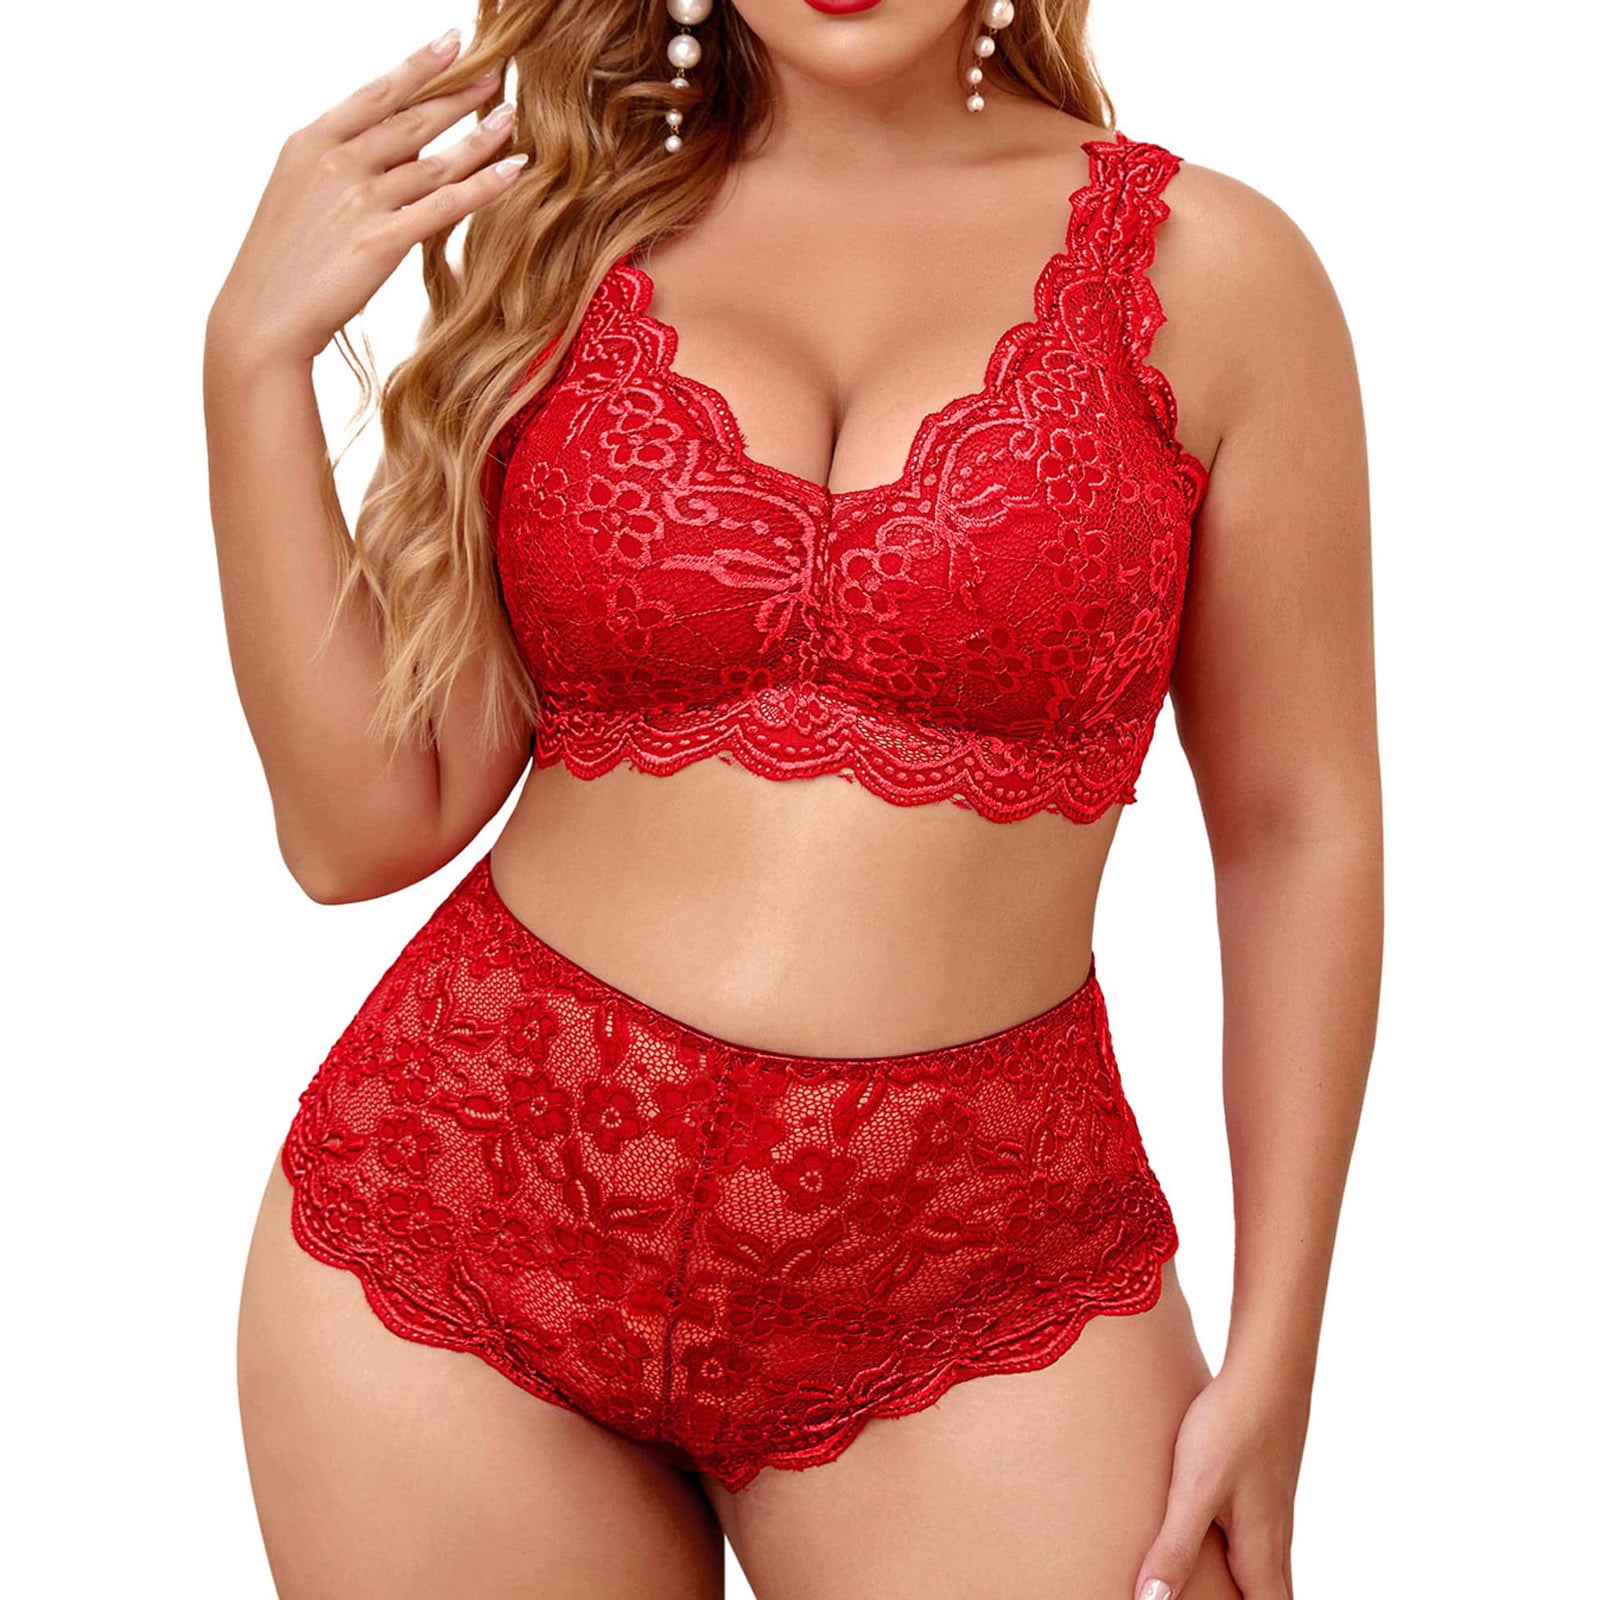 Vedolay Bra And Panty Sets For Women Plus Size 2 Piece Lingerie for Women  Strappy Bra and Panty Underwear Sets Lace Underwear Set for Women(,XXL)